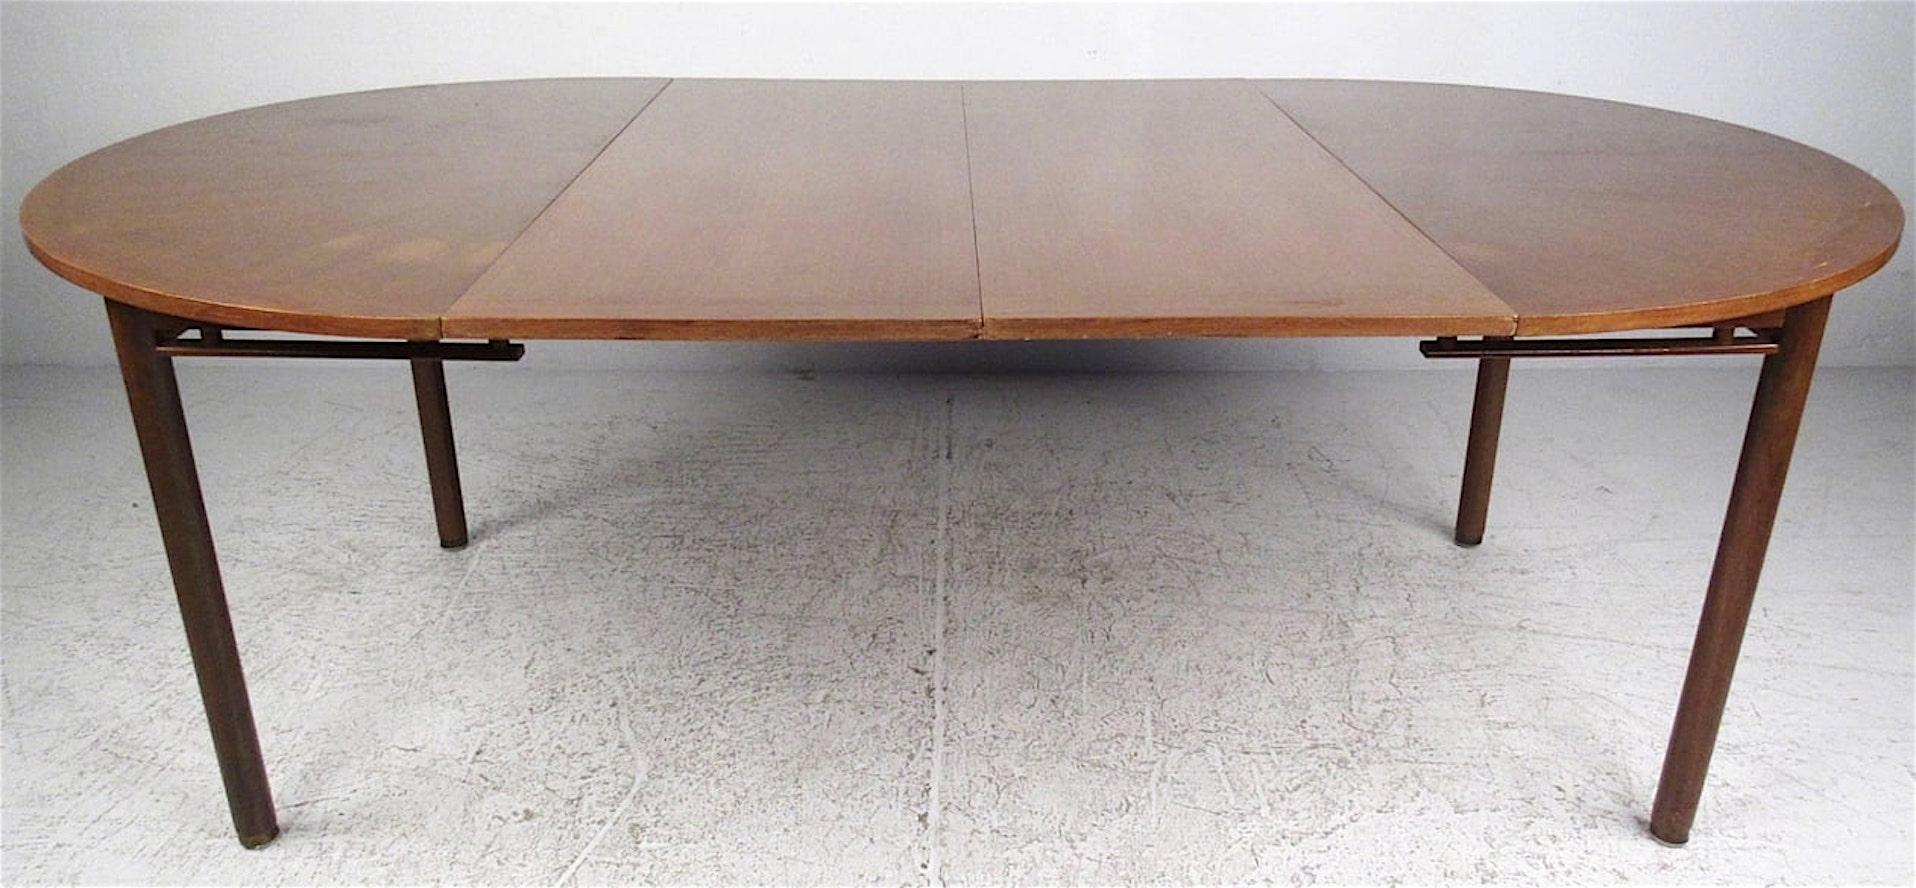 This round mid-century modern dining table features radiating marquetry veneer pattern top and two leaves that extend the length to 7 feet.
Each leaf is 18